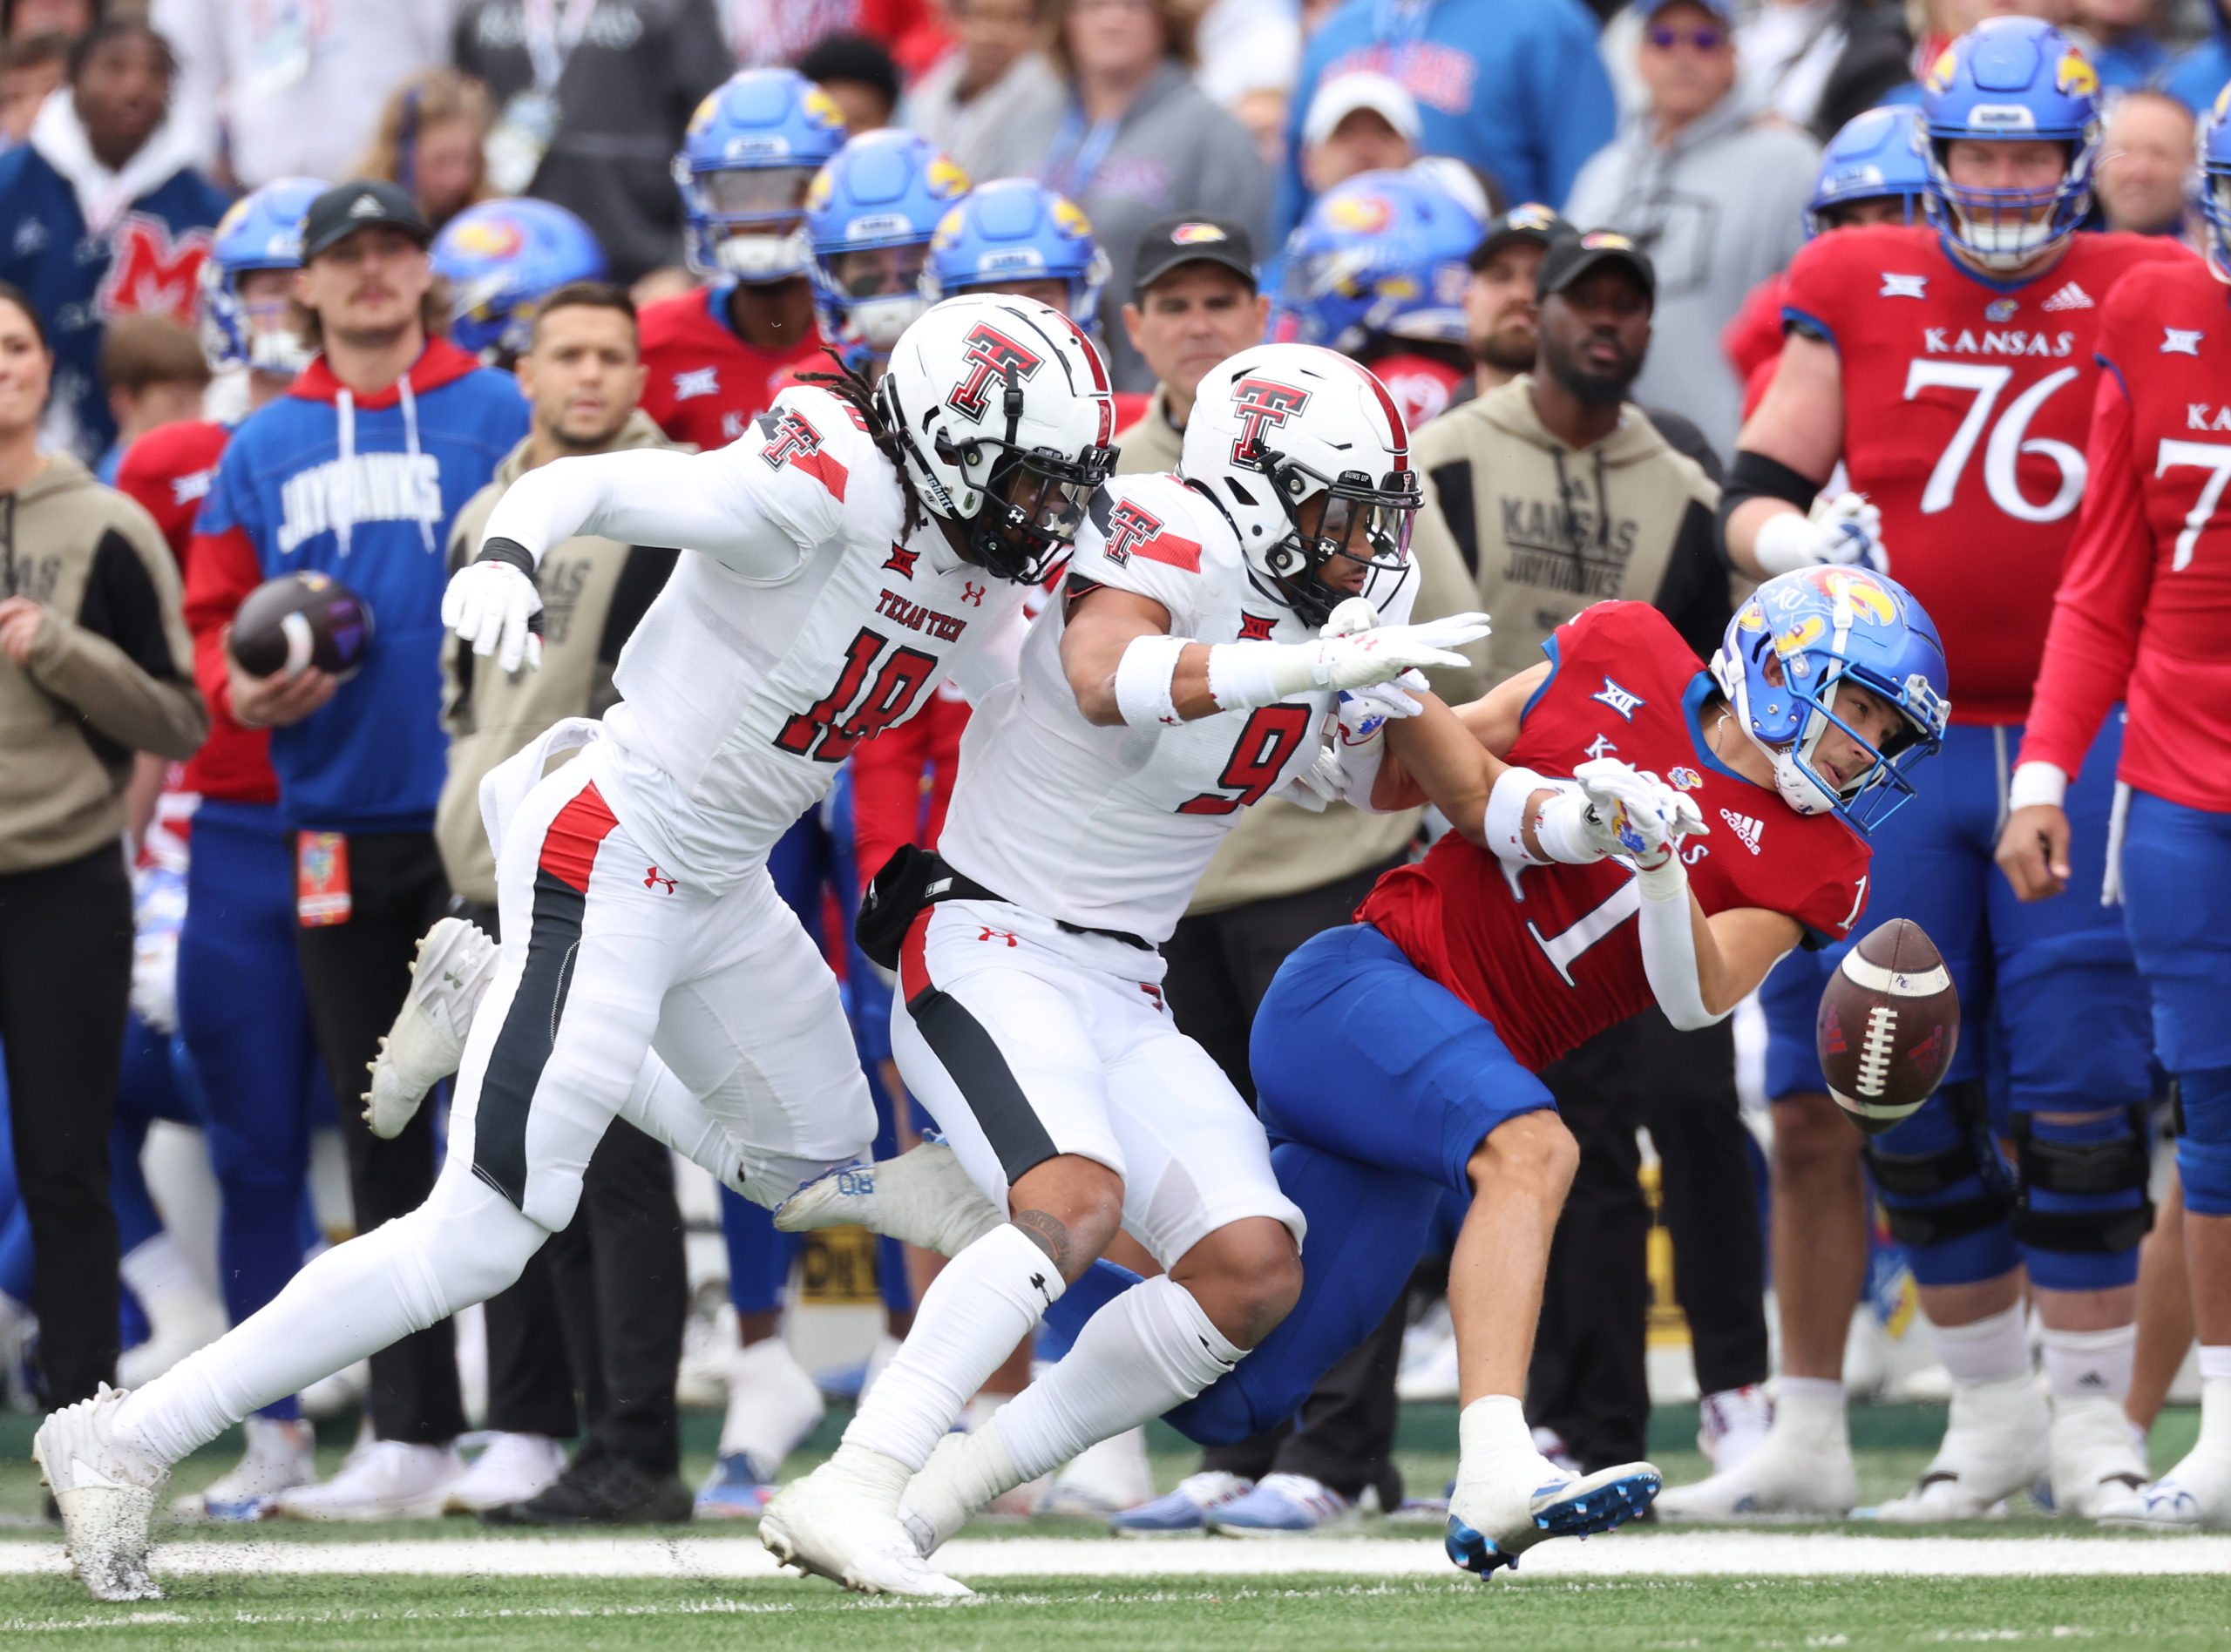 LAWRENCE, KANSAS - NOVEMBER 11: Defensive back Tyler Owens #18 and defensive back C.J. Baskerville #9 of the Texas Tech Red Raiders break up a pass intended for wide receiver Luke Grimm #11 of the Kansas Jayhawks during the game at David Booth Kansas Memorial Stadium on November 11, 2023 in Lawrence, Kansas. Jamie Squire/Getty Images